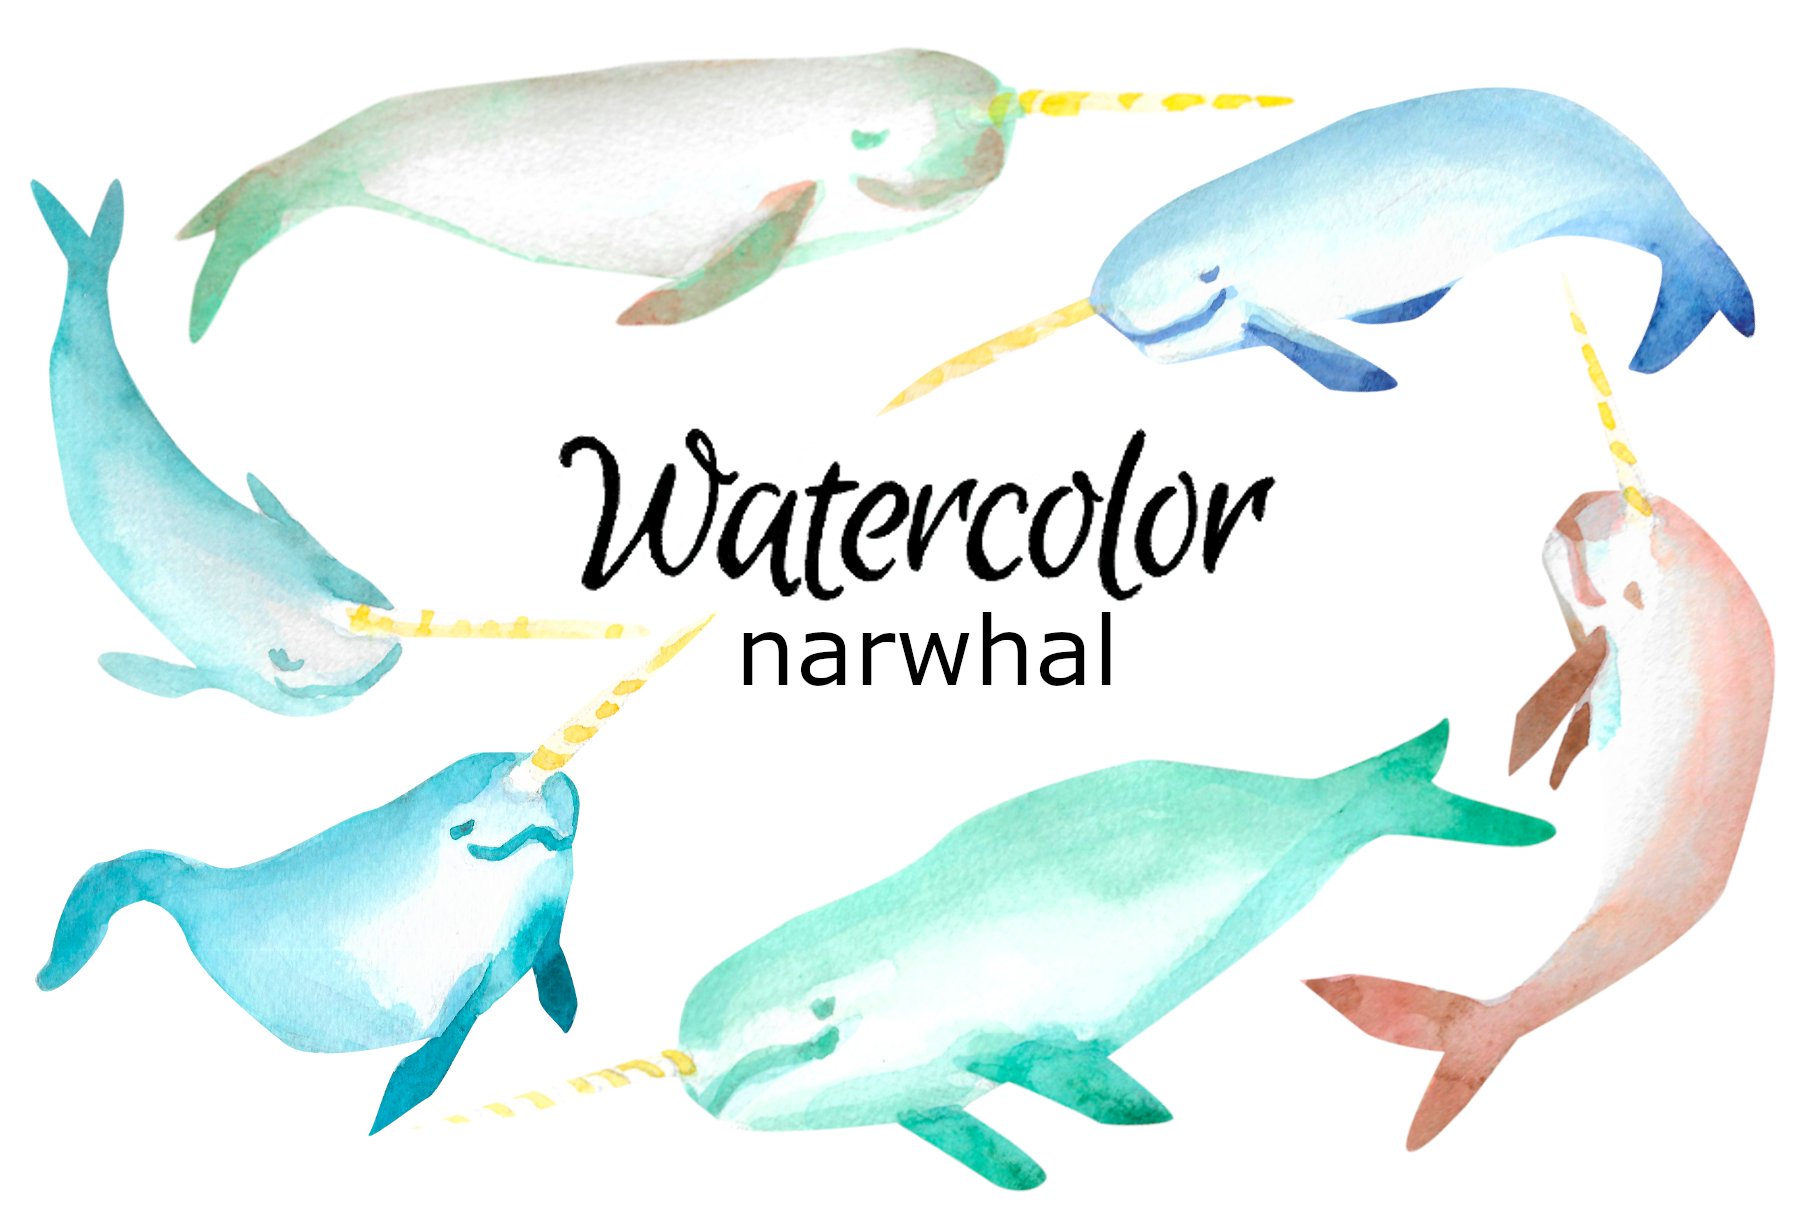 Watercolor narwhal clipart cover image.